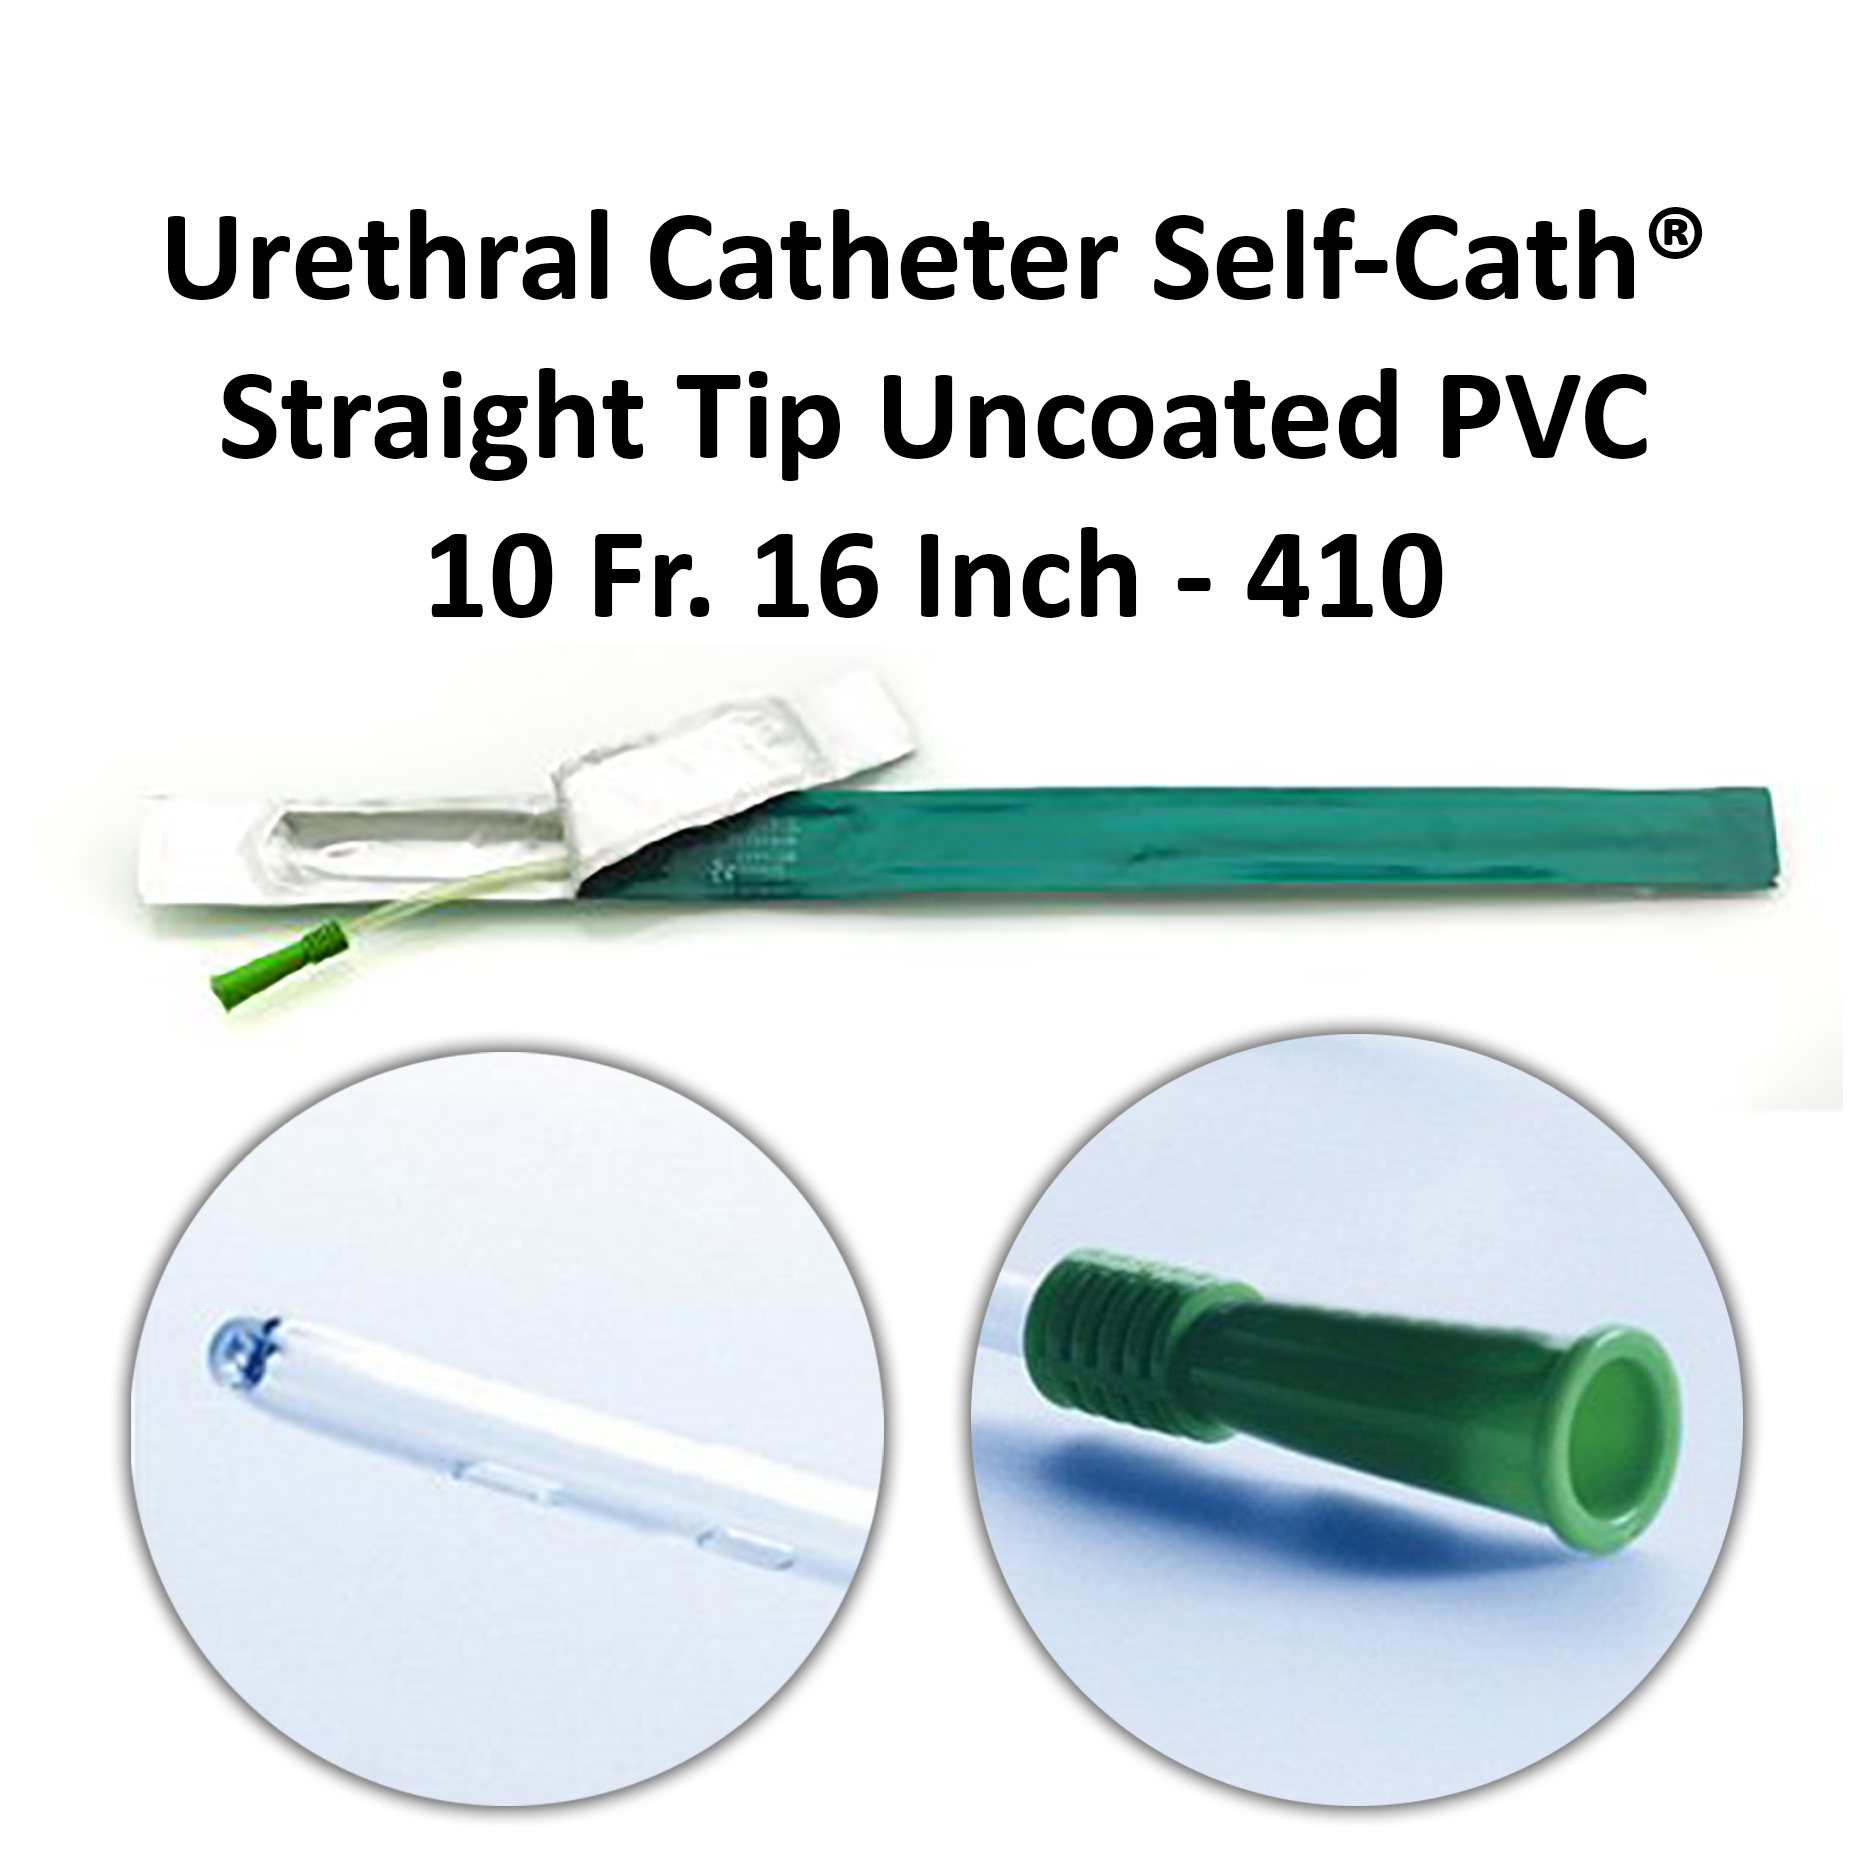 Urethral Catheter Self-Cath® Straight Tip Uncoated PVC 10 Fr. 16 Inch - 410